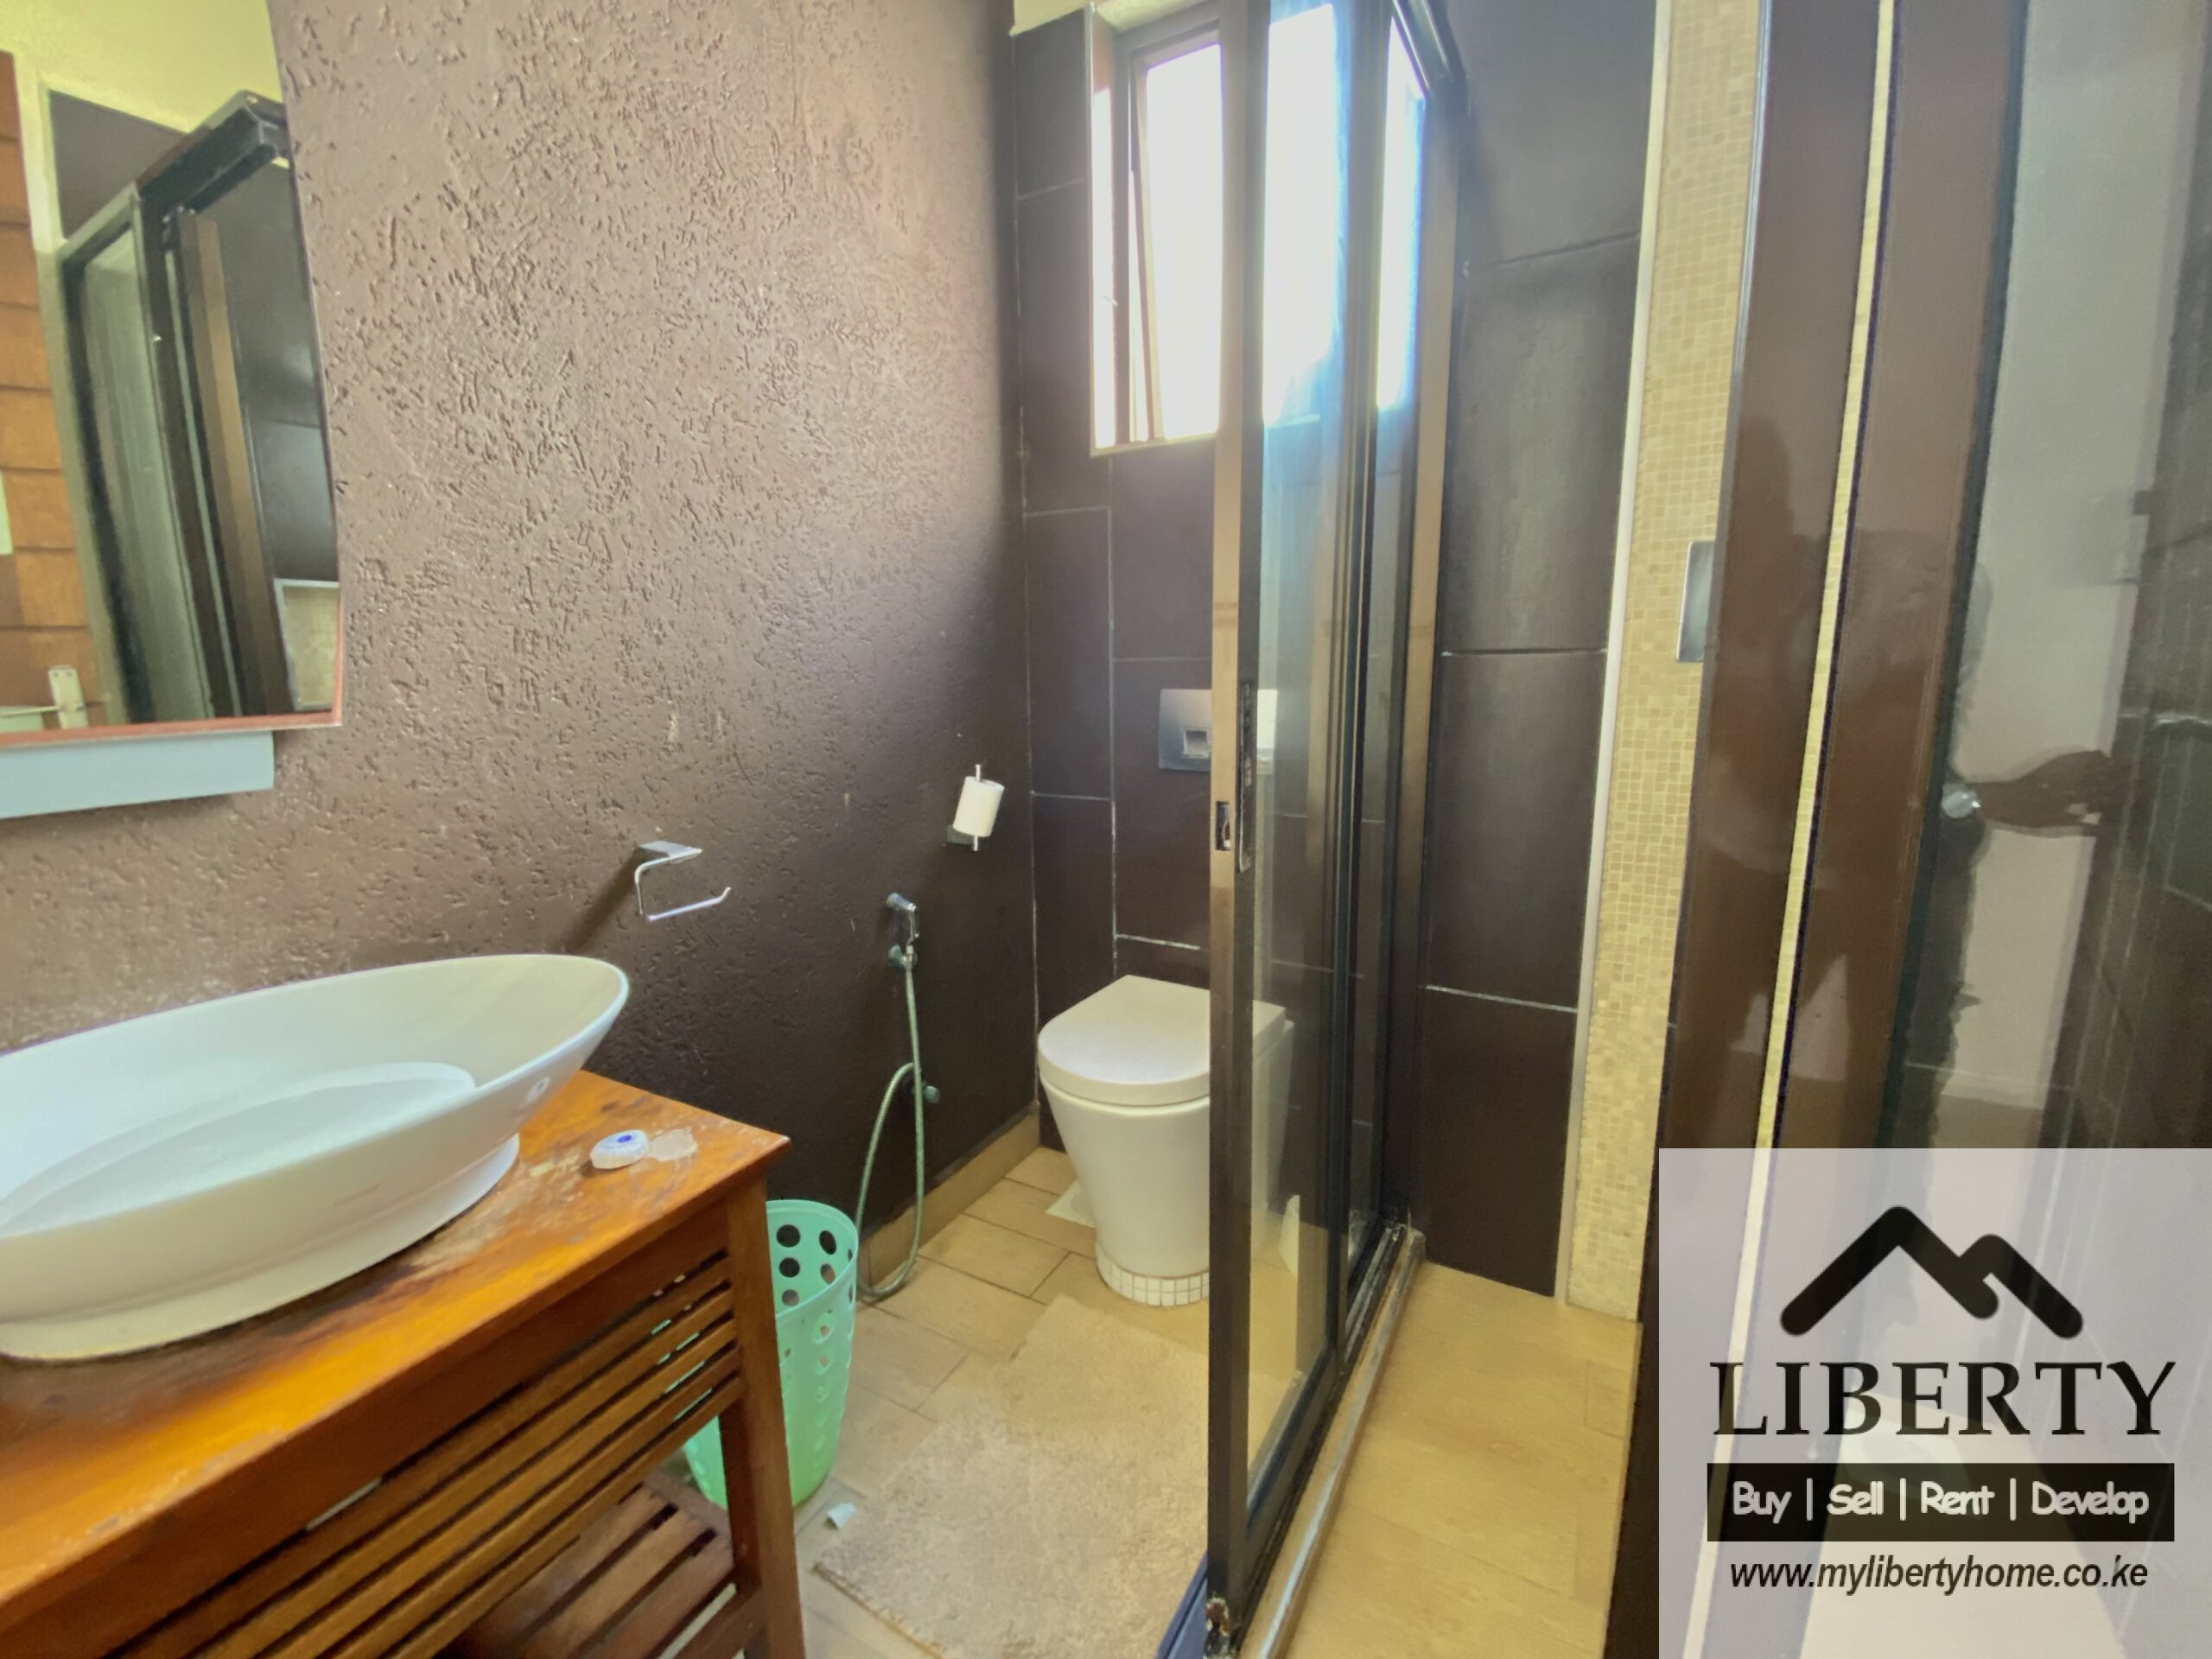 Executive 3 Bedroom Furnished Apartment In Mombasa-Nyali For Rent-165K- Ref-782